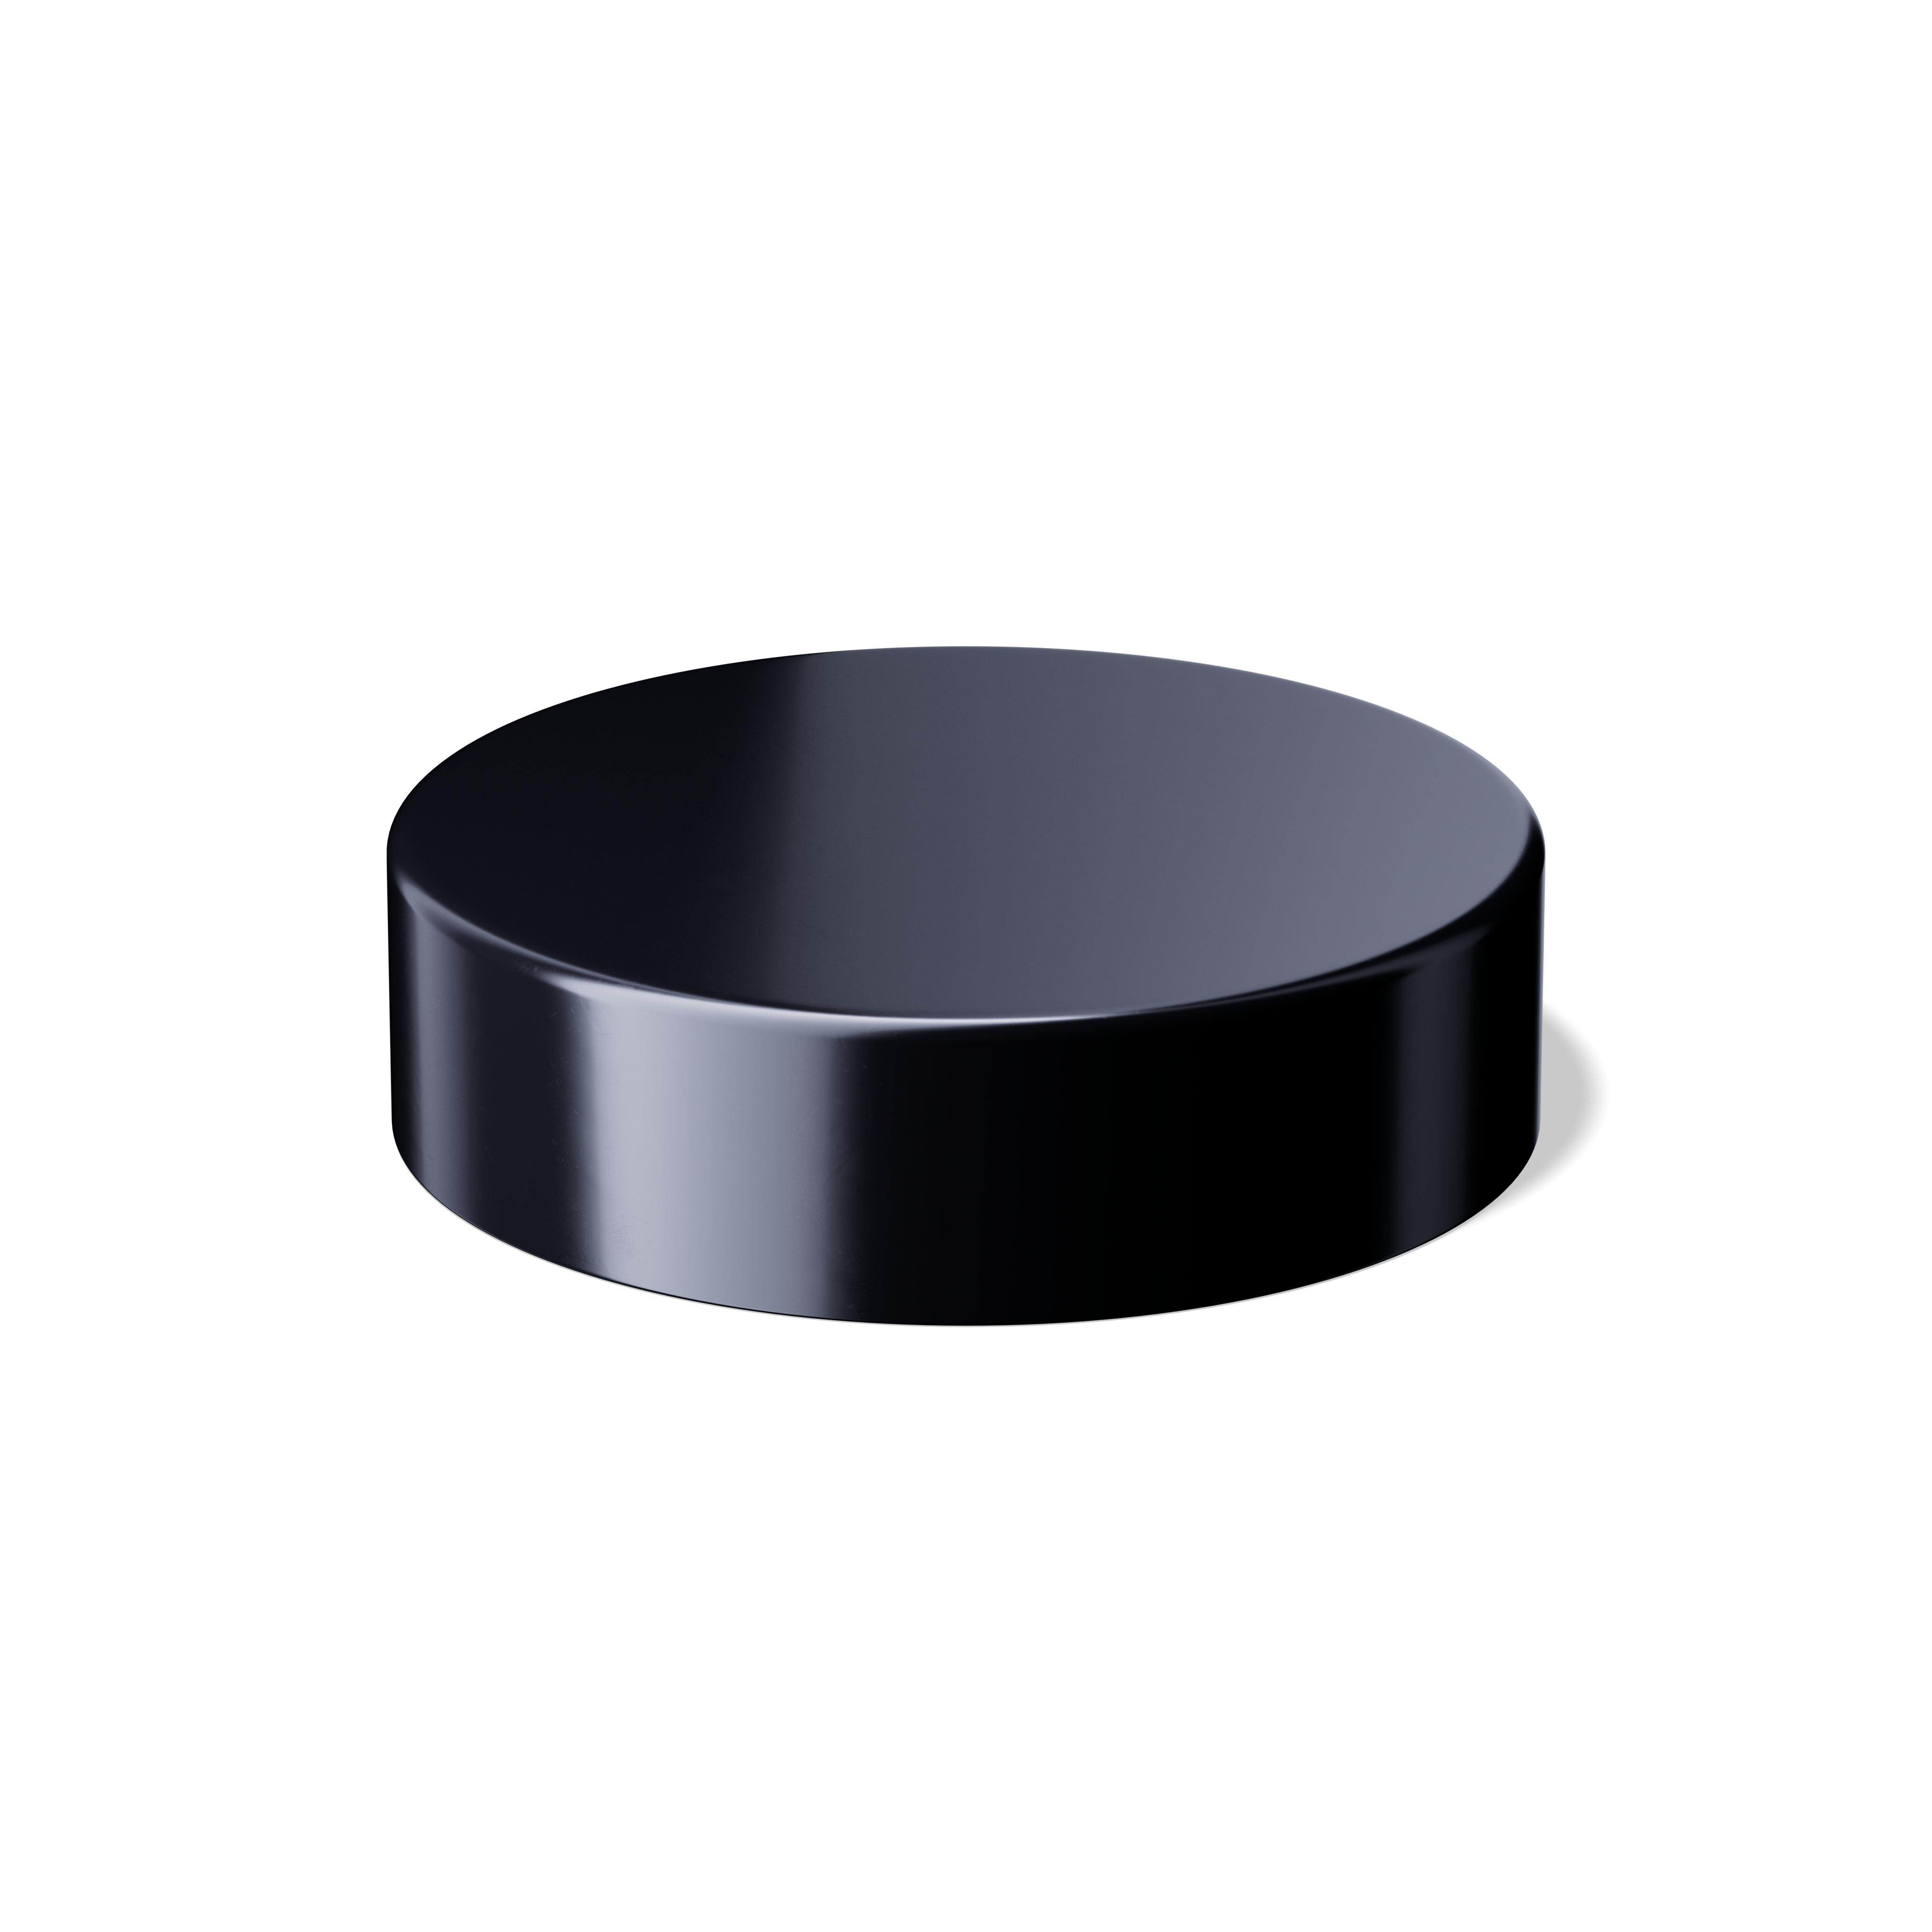 Lid child-resistant Modern 64 special, PP, black, glossy finish, violet Phan inlay (Eris 120)